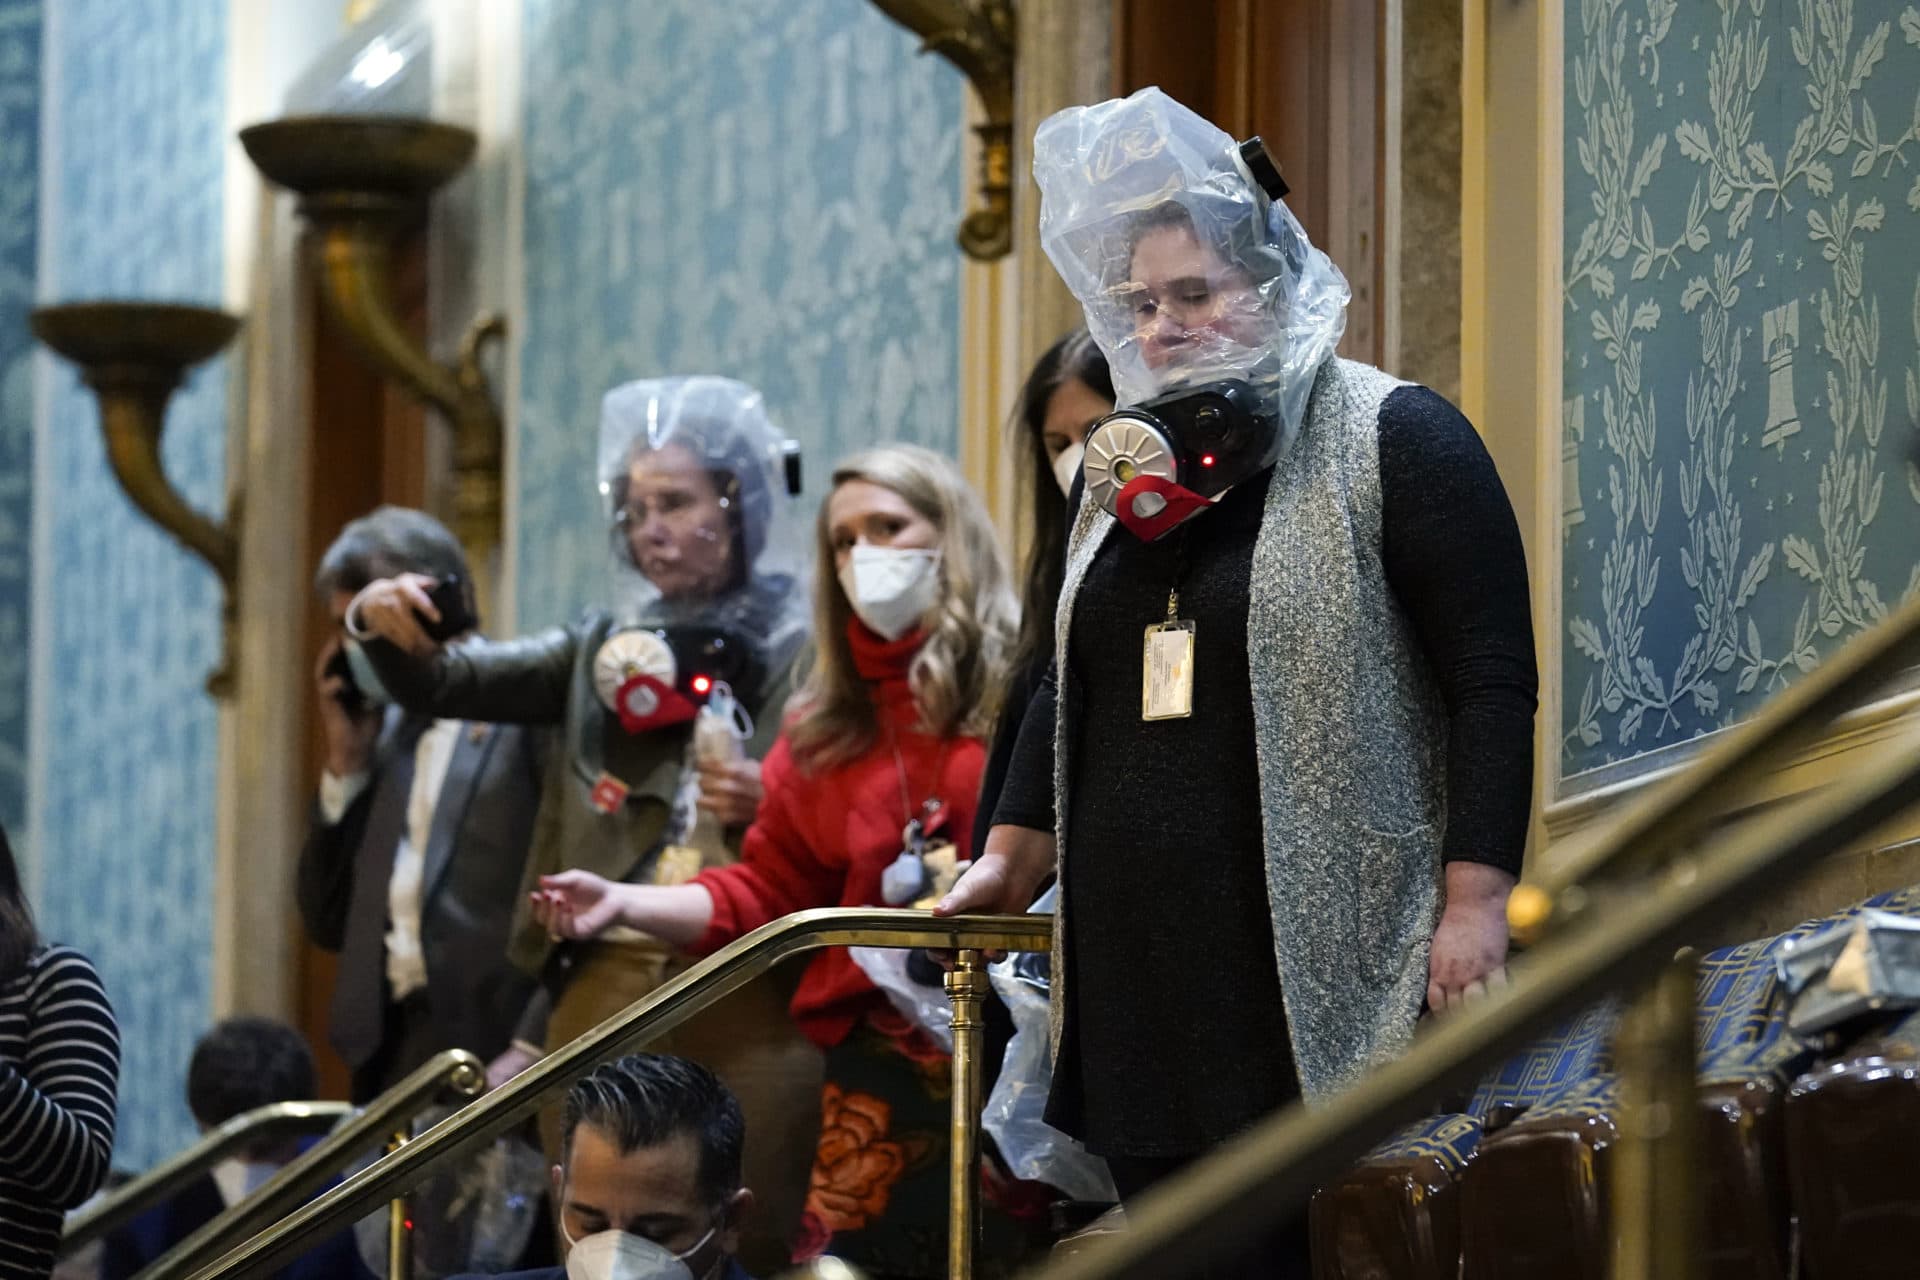 People are seen in the House gallery as protesters try to break into the House Chamber. (Andrew Harnik/AP)